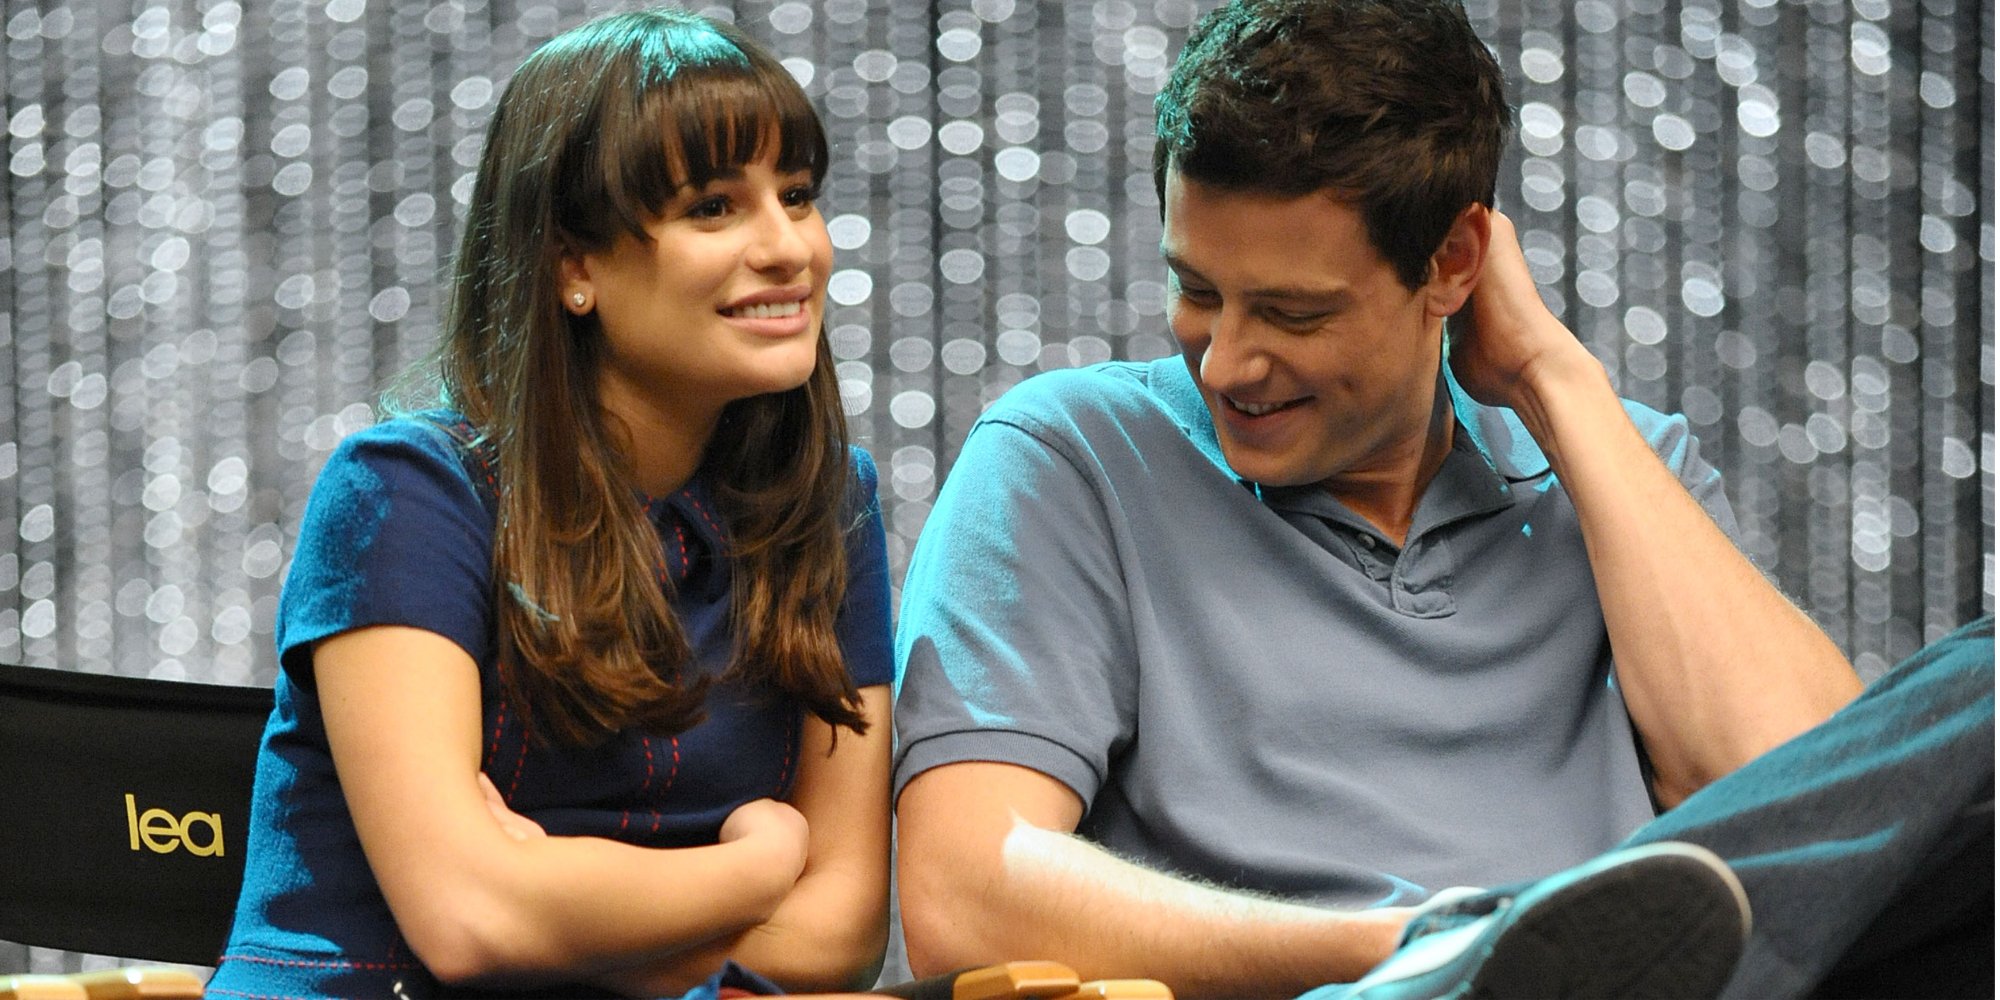 Lea Michele and Cory Monteith photographed together in 2011.